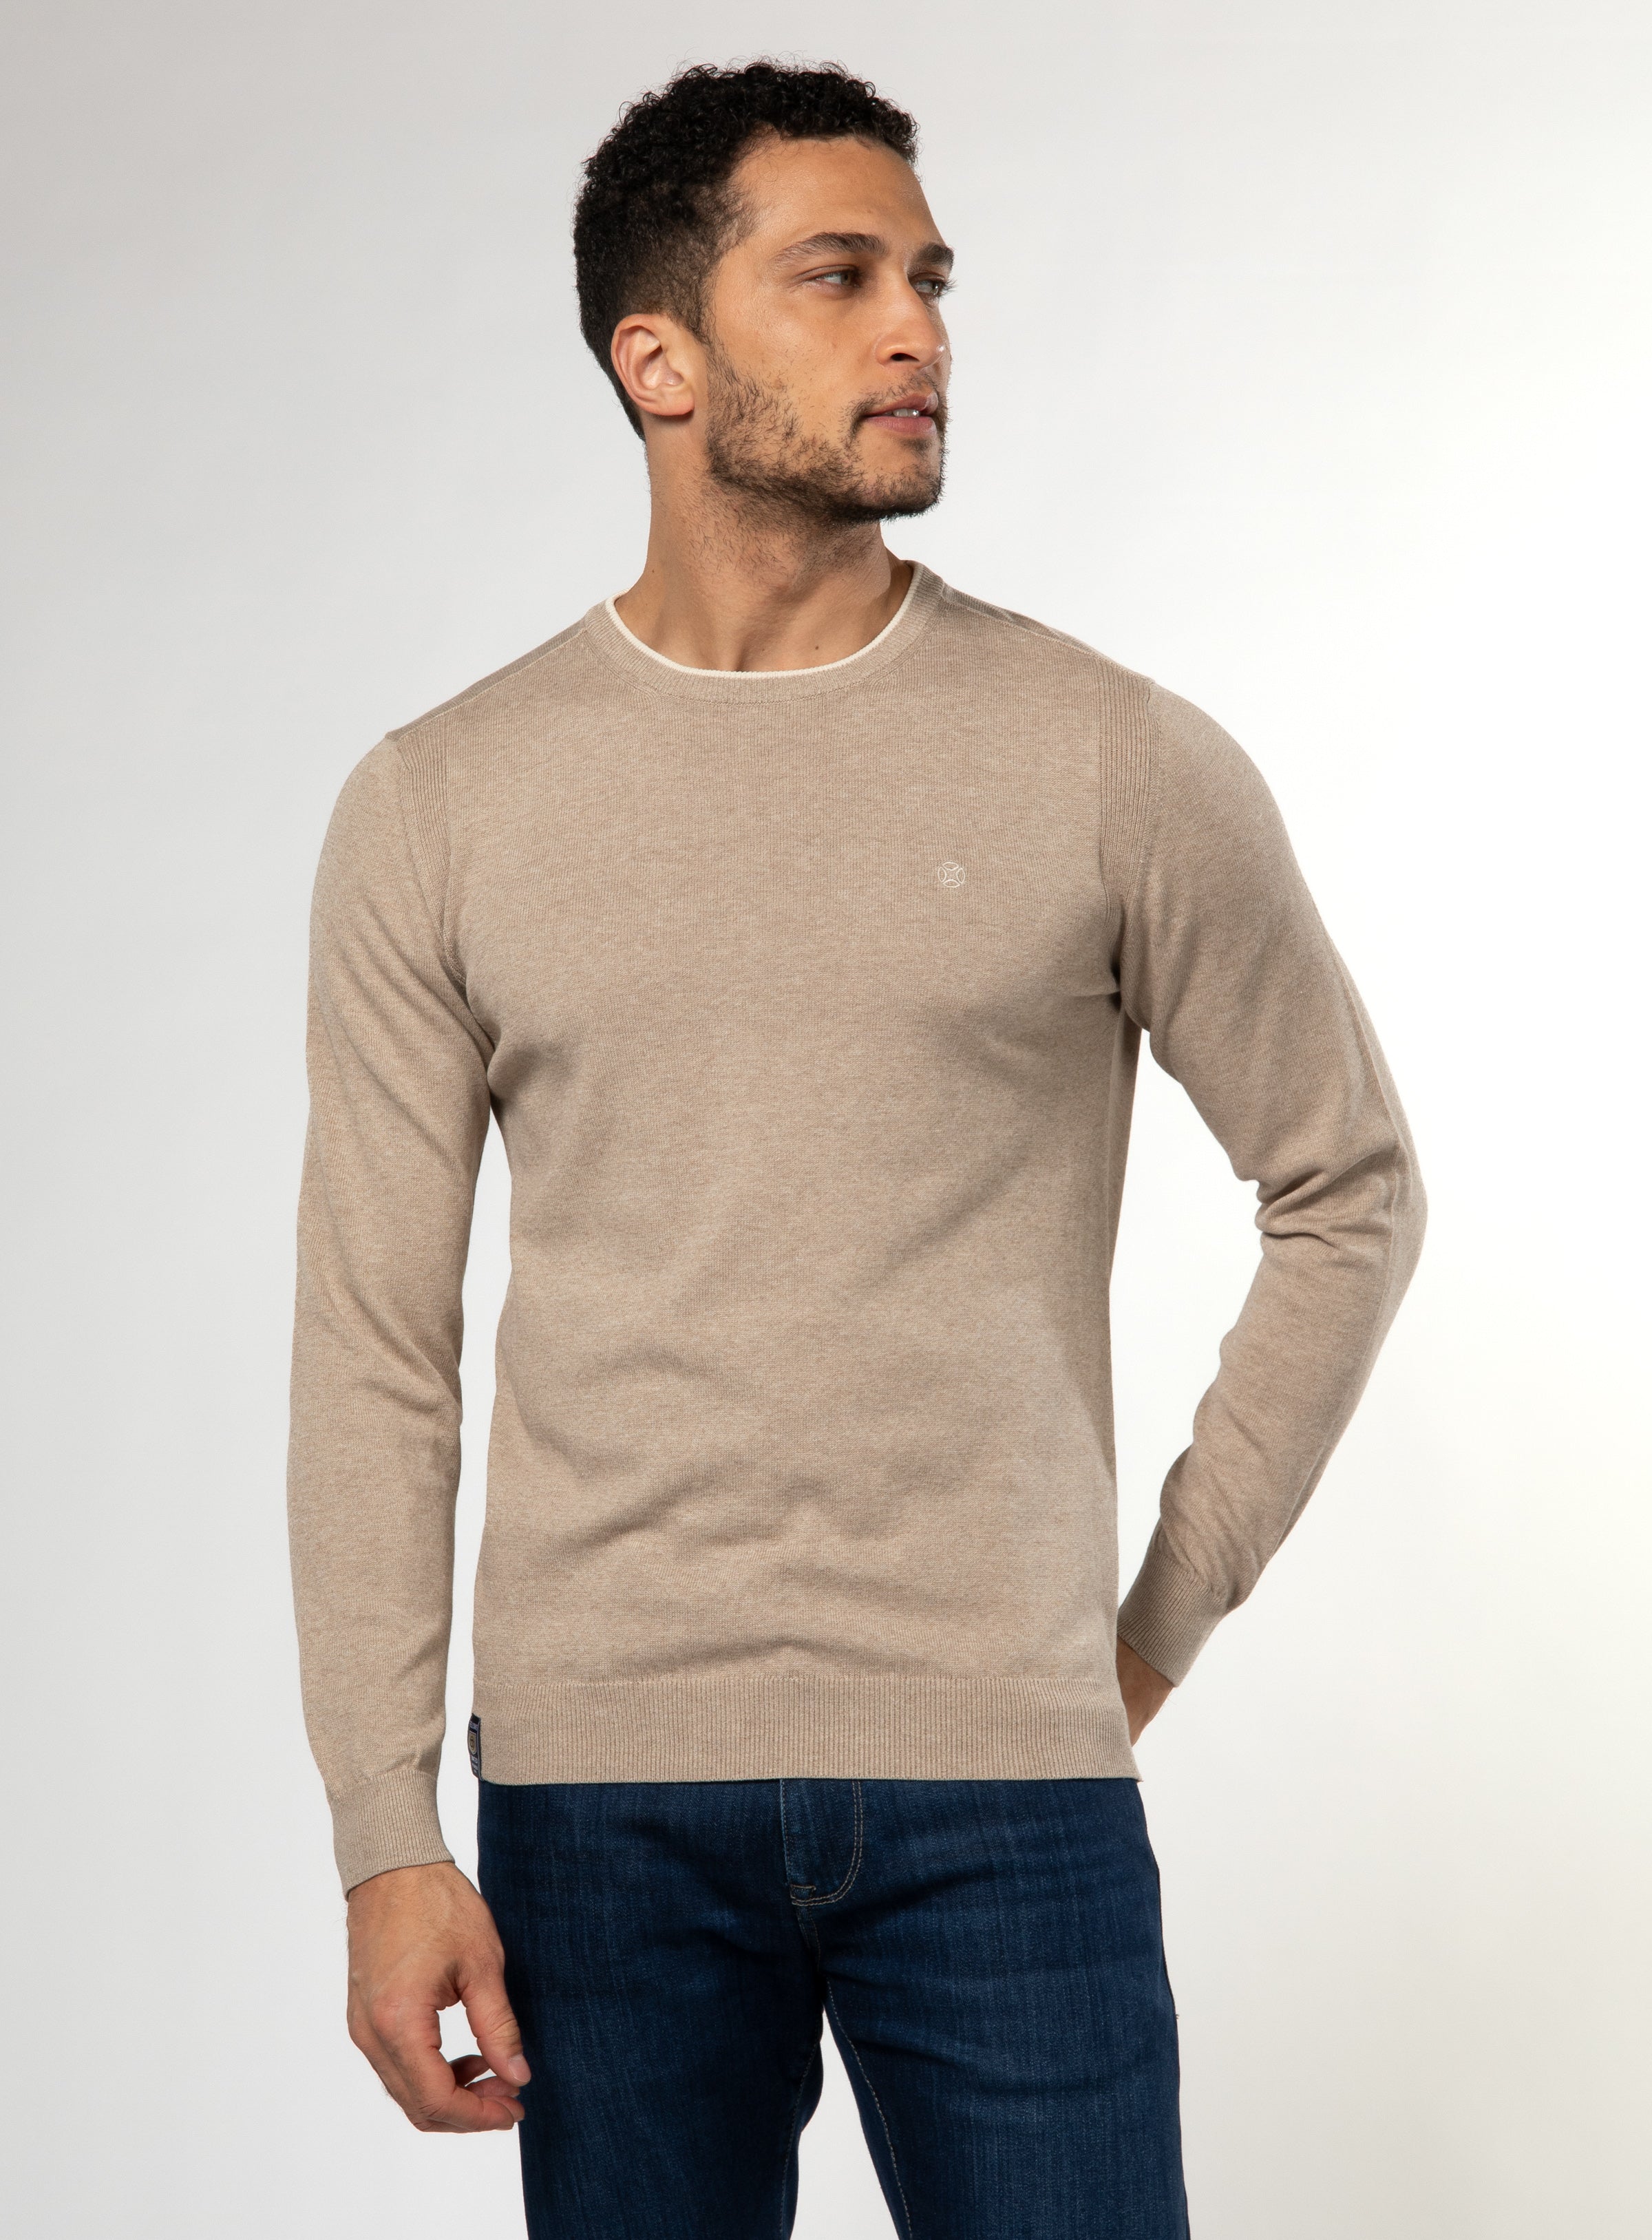 Contrasted Details Crew Neck Sweater